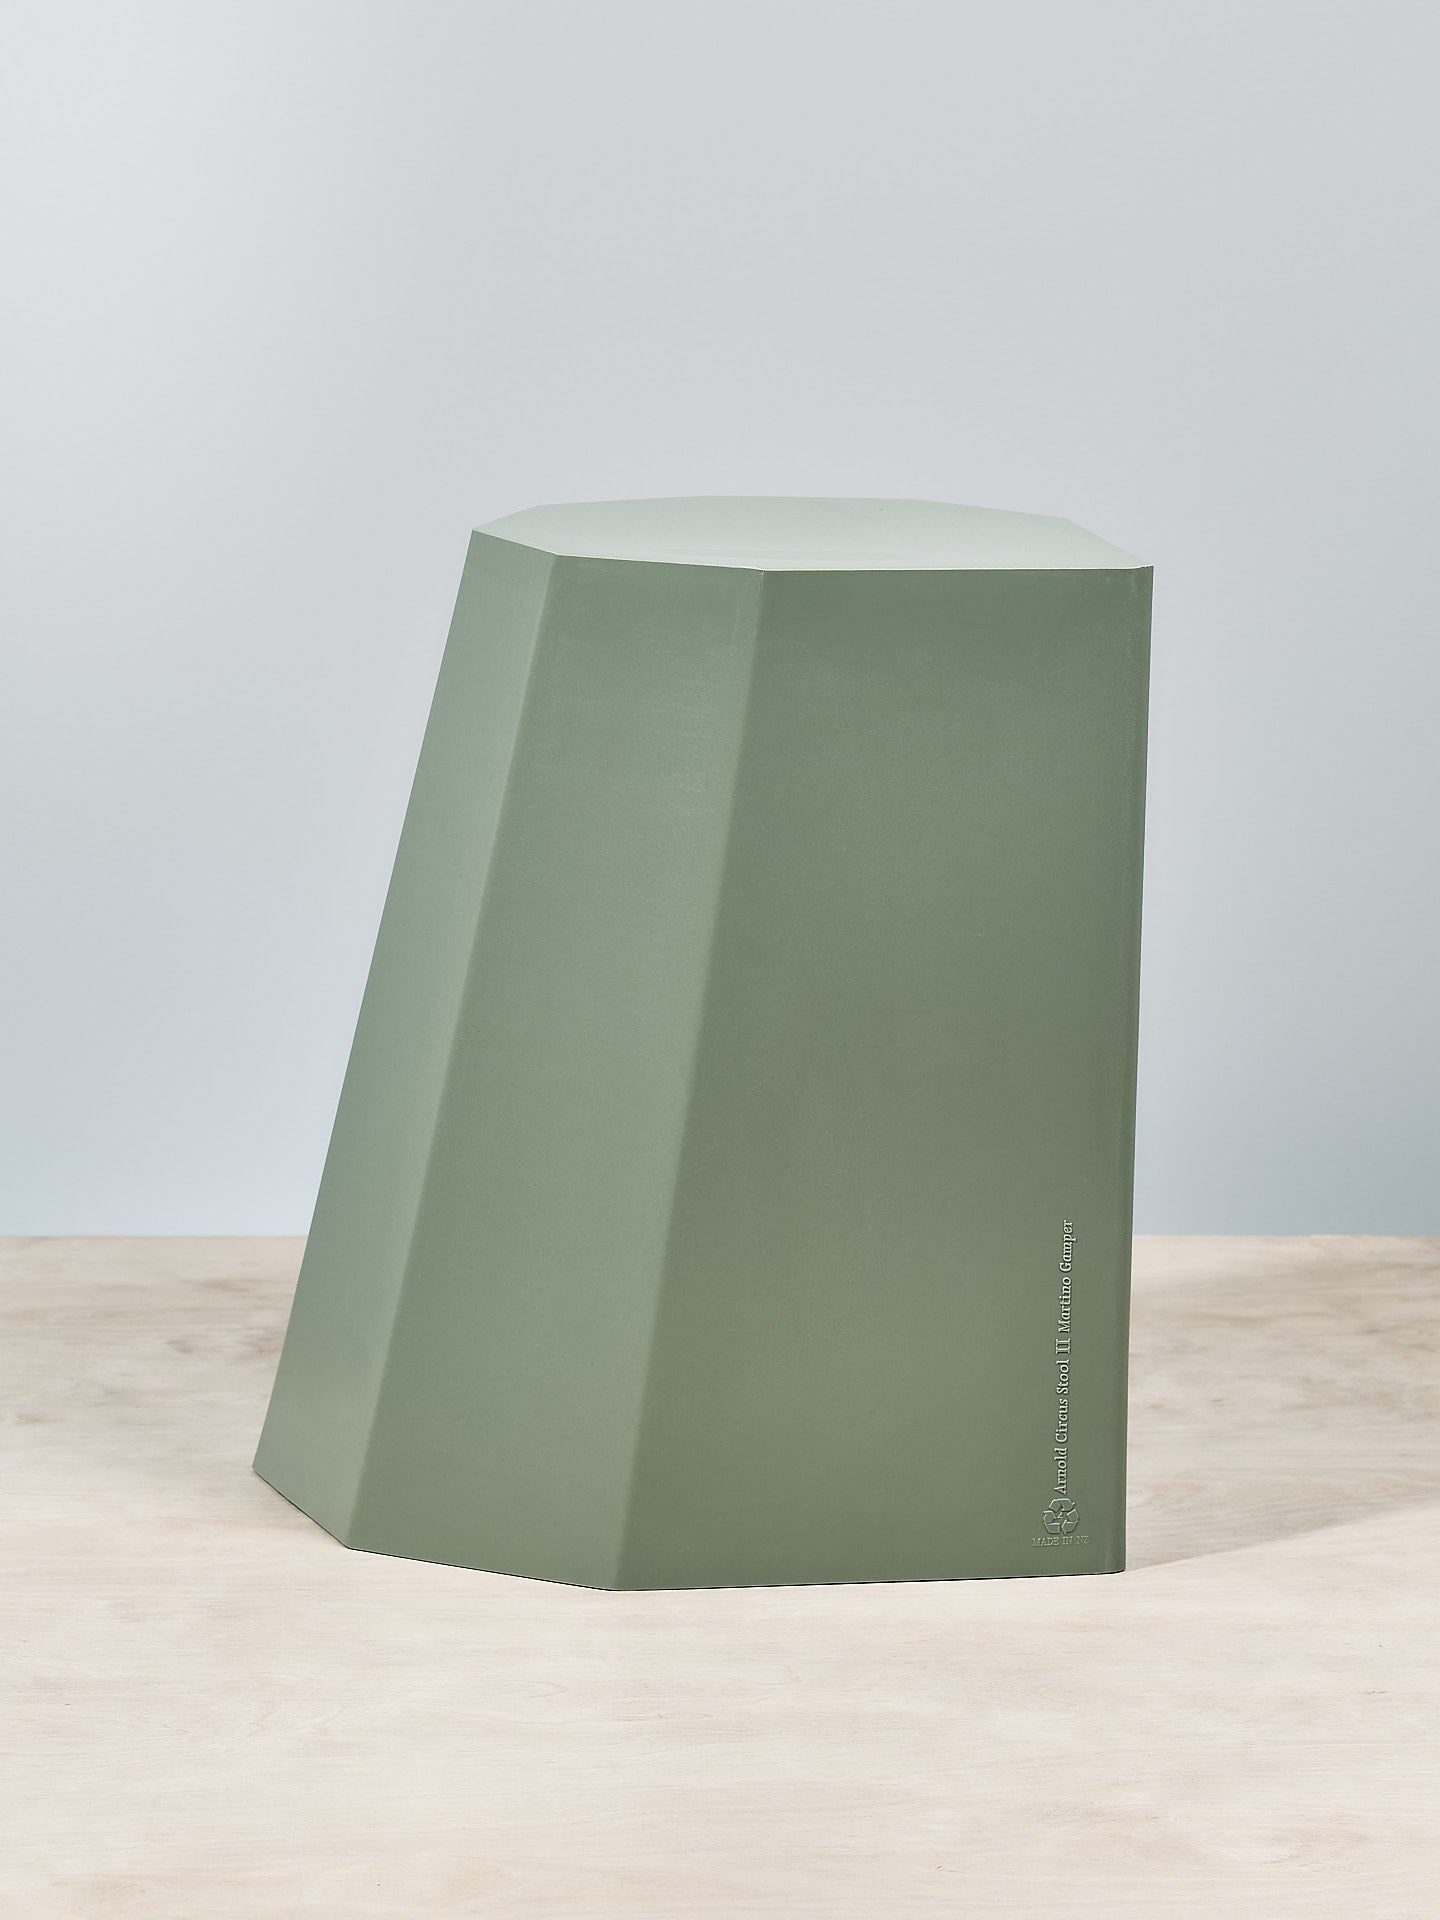 An Arnold Circus Stool - Sage by Martino Gamper on top of a table.